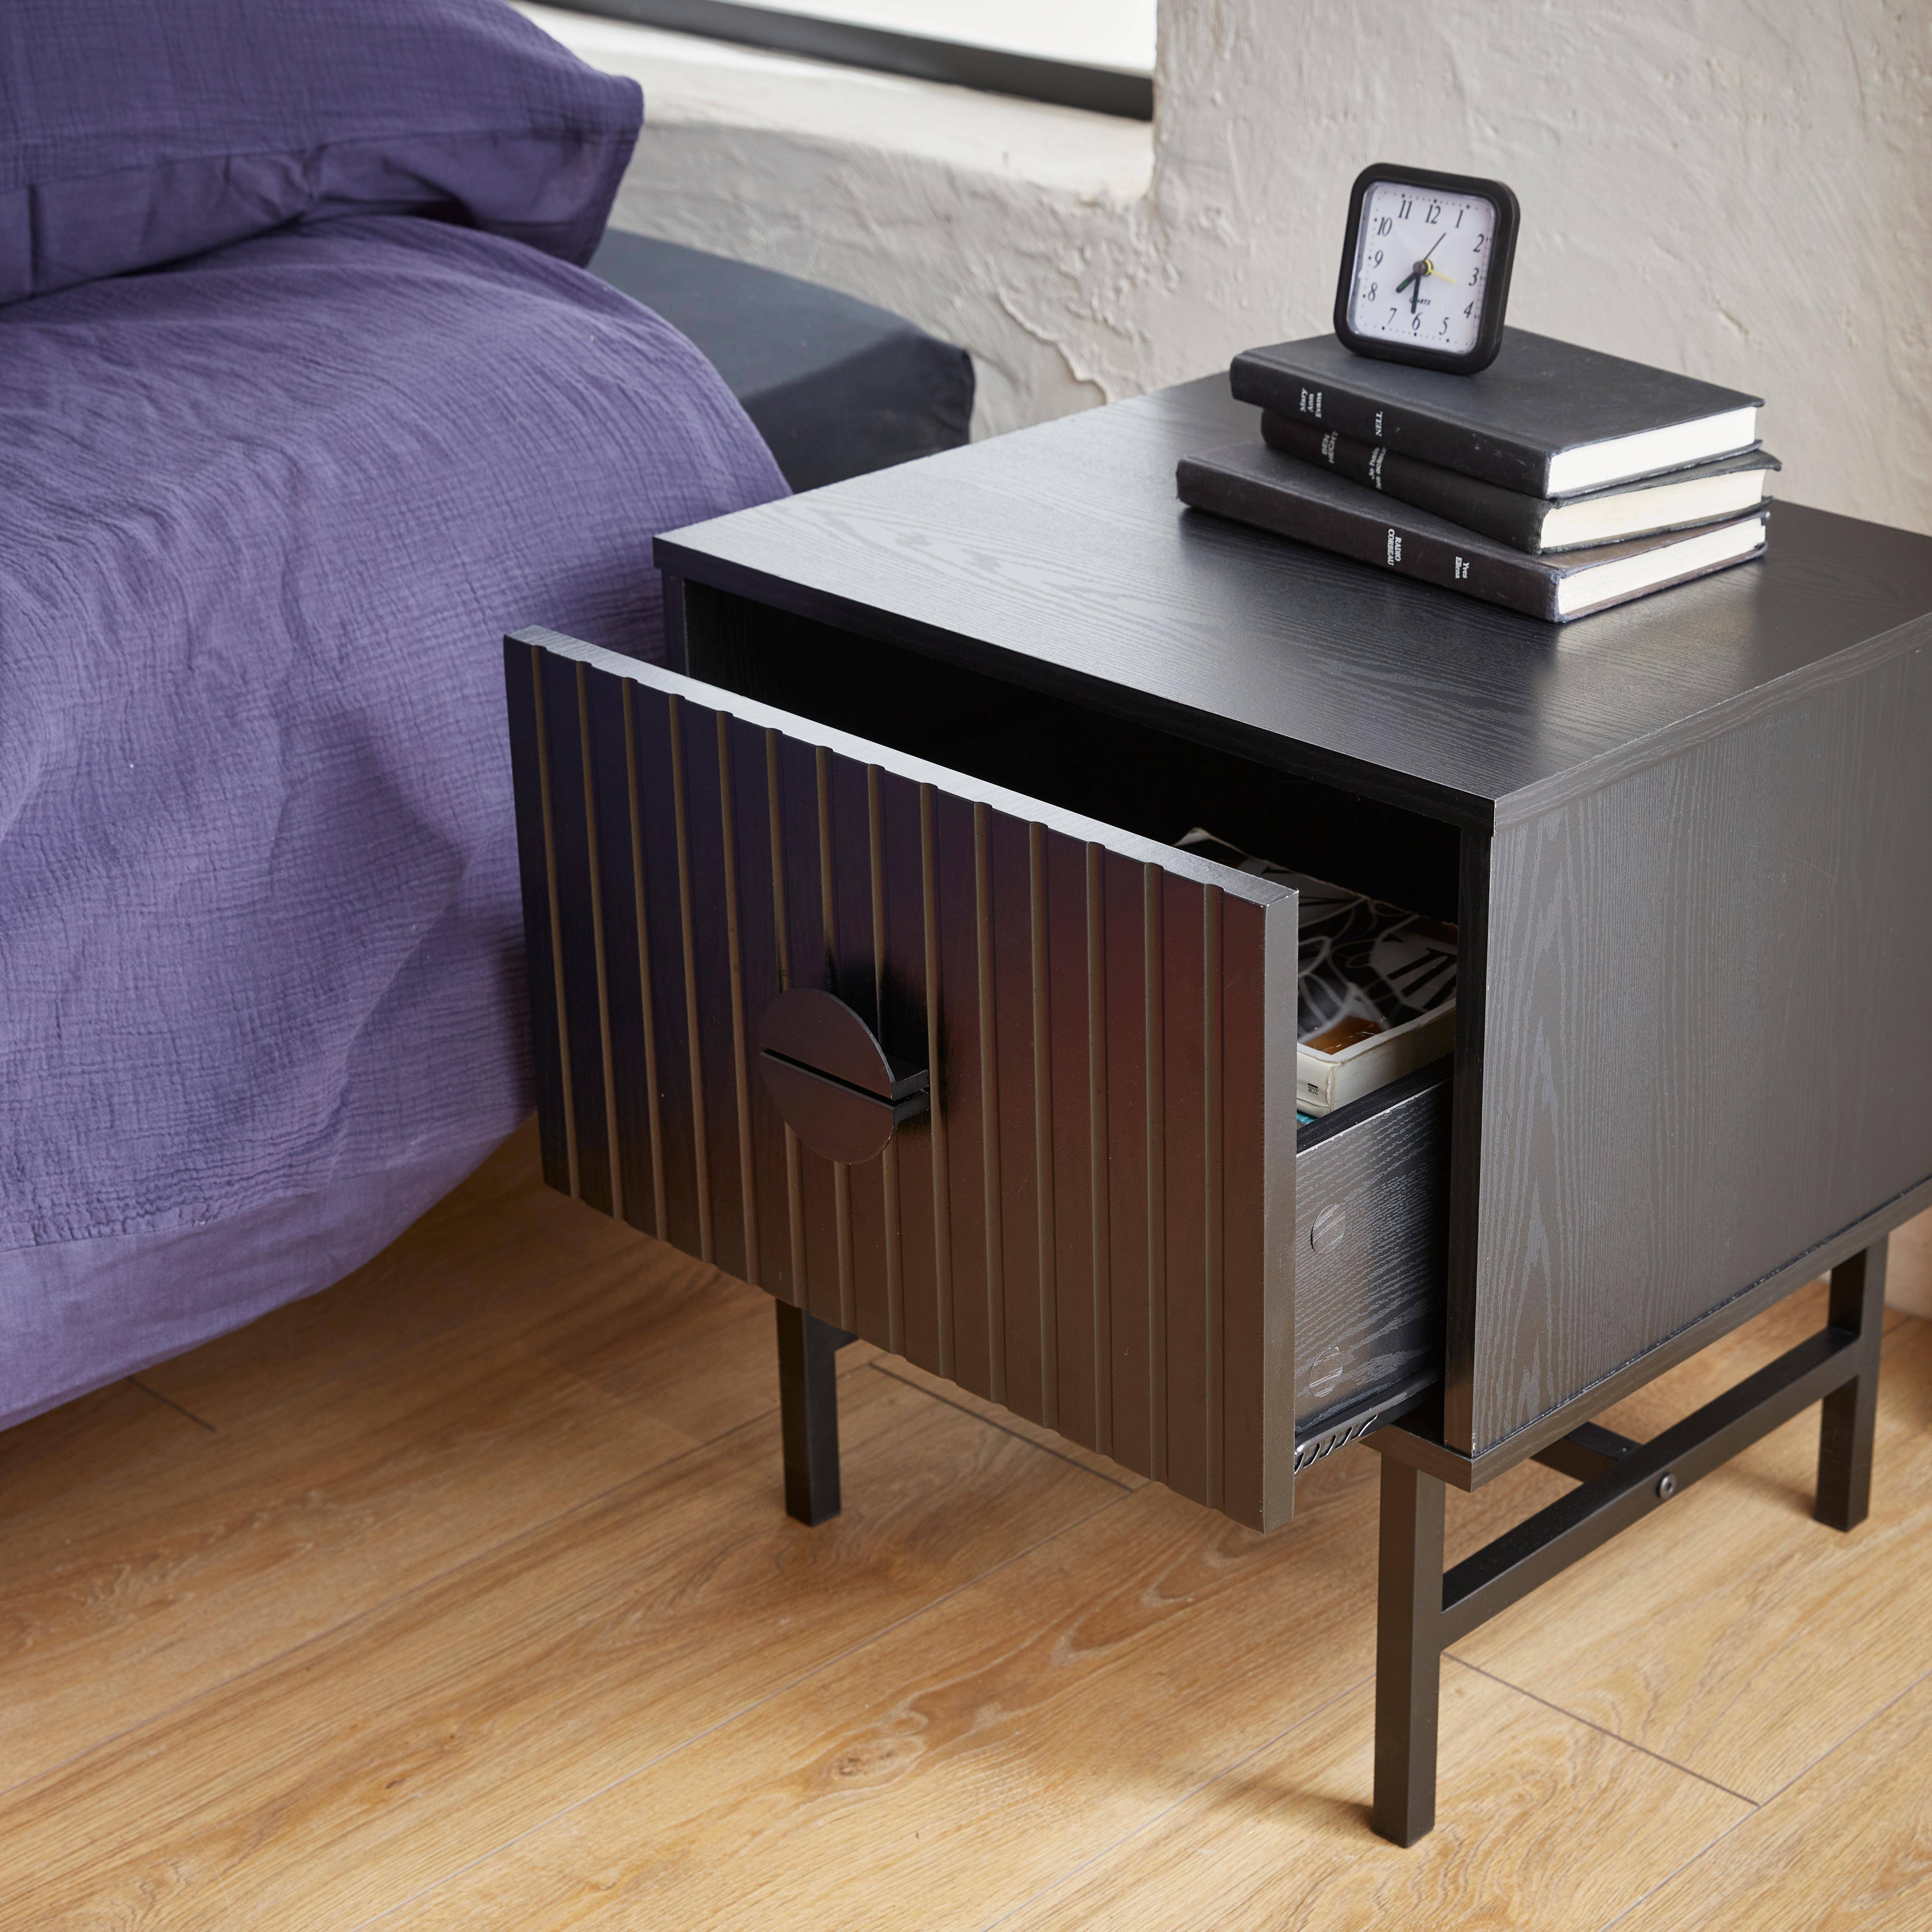 Bedside table with one drawer, ridged effect, industrial style, 48x39x50.3cm - Bazalt - Black,sweeek,Photo2